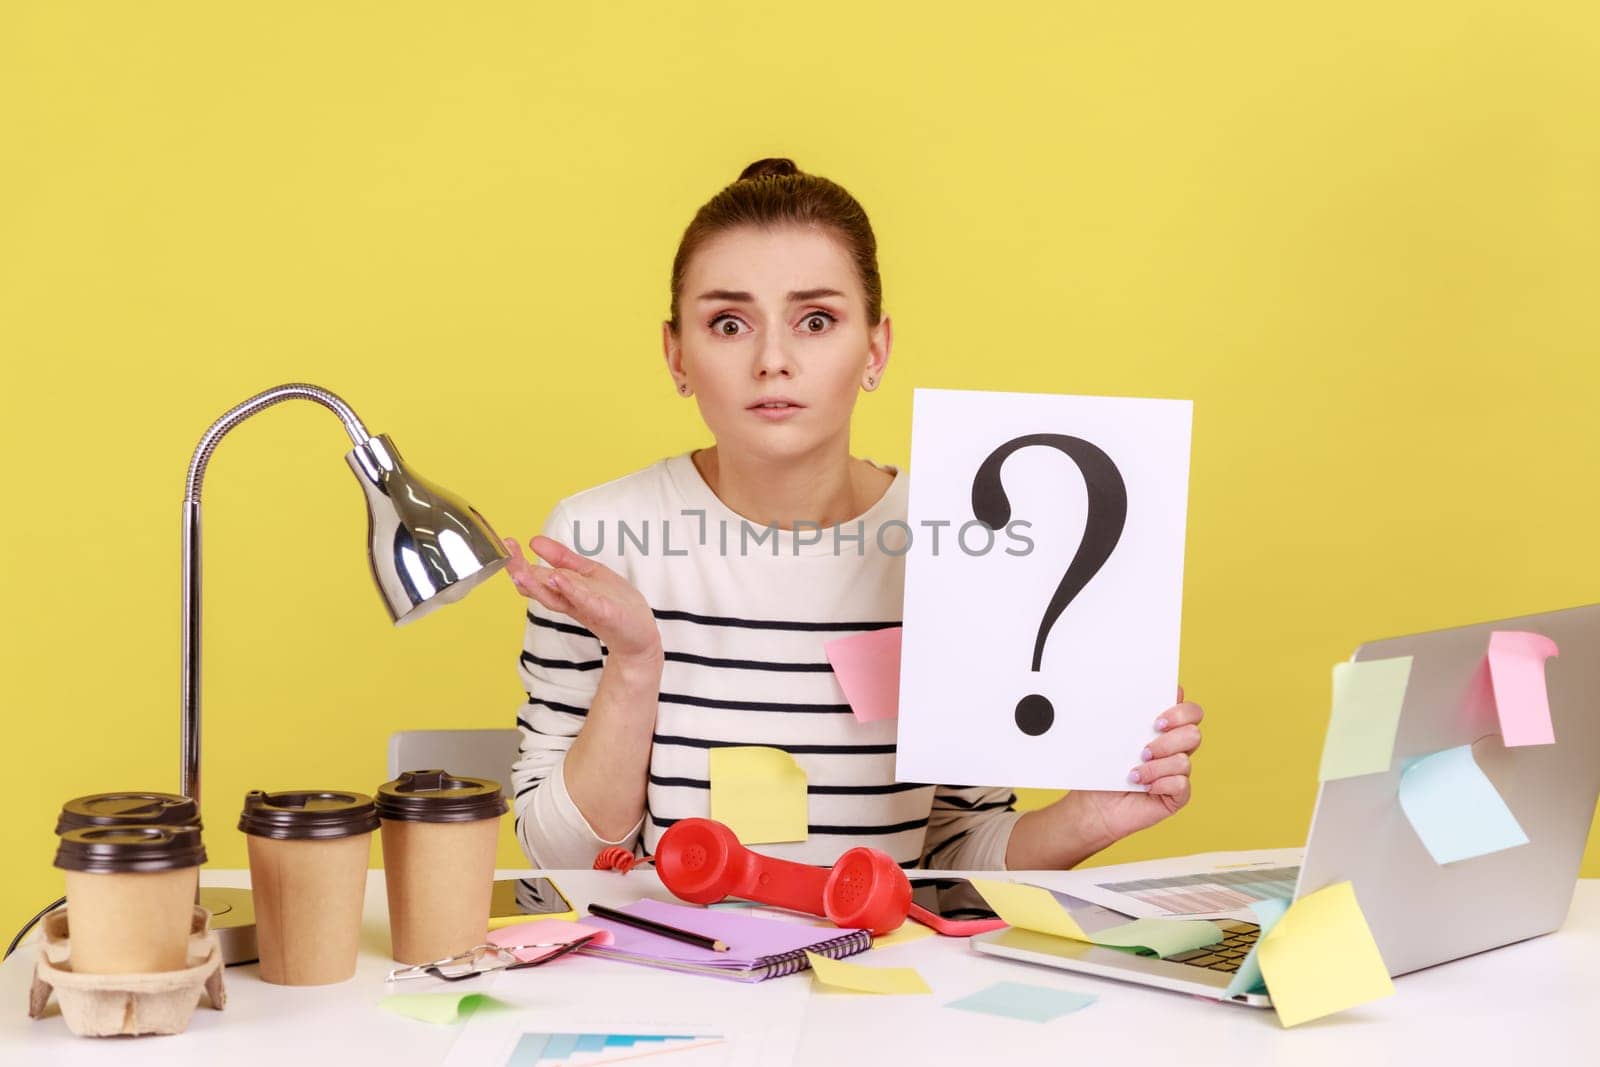 Portrait of shocked astonished woman looking at camera, holding paper with question mark, thinks about tasks, covered with sticky notes. Indoor studio studio shot isolated on yellow background.